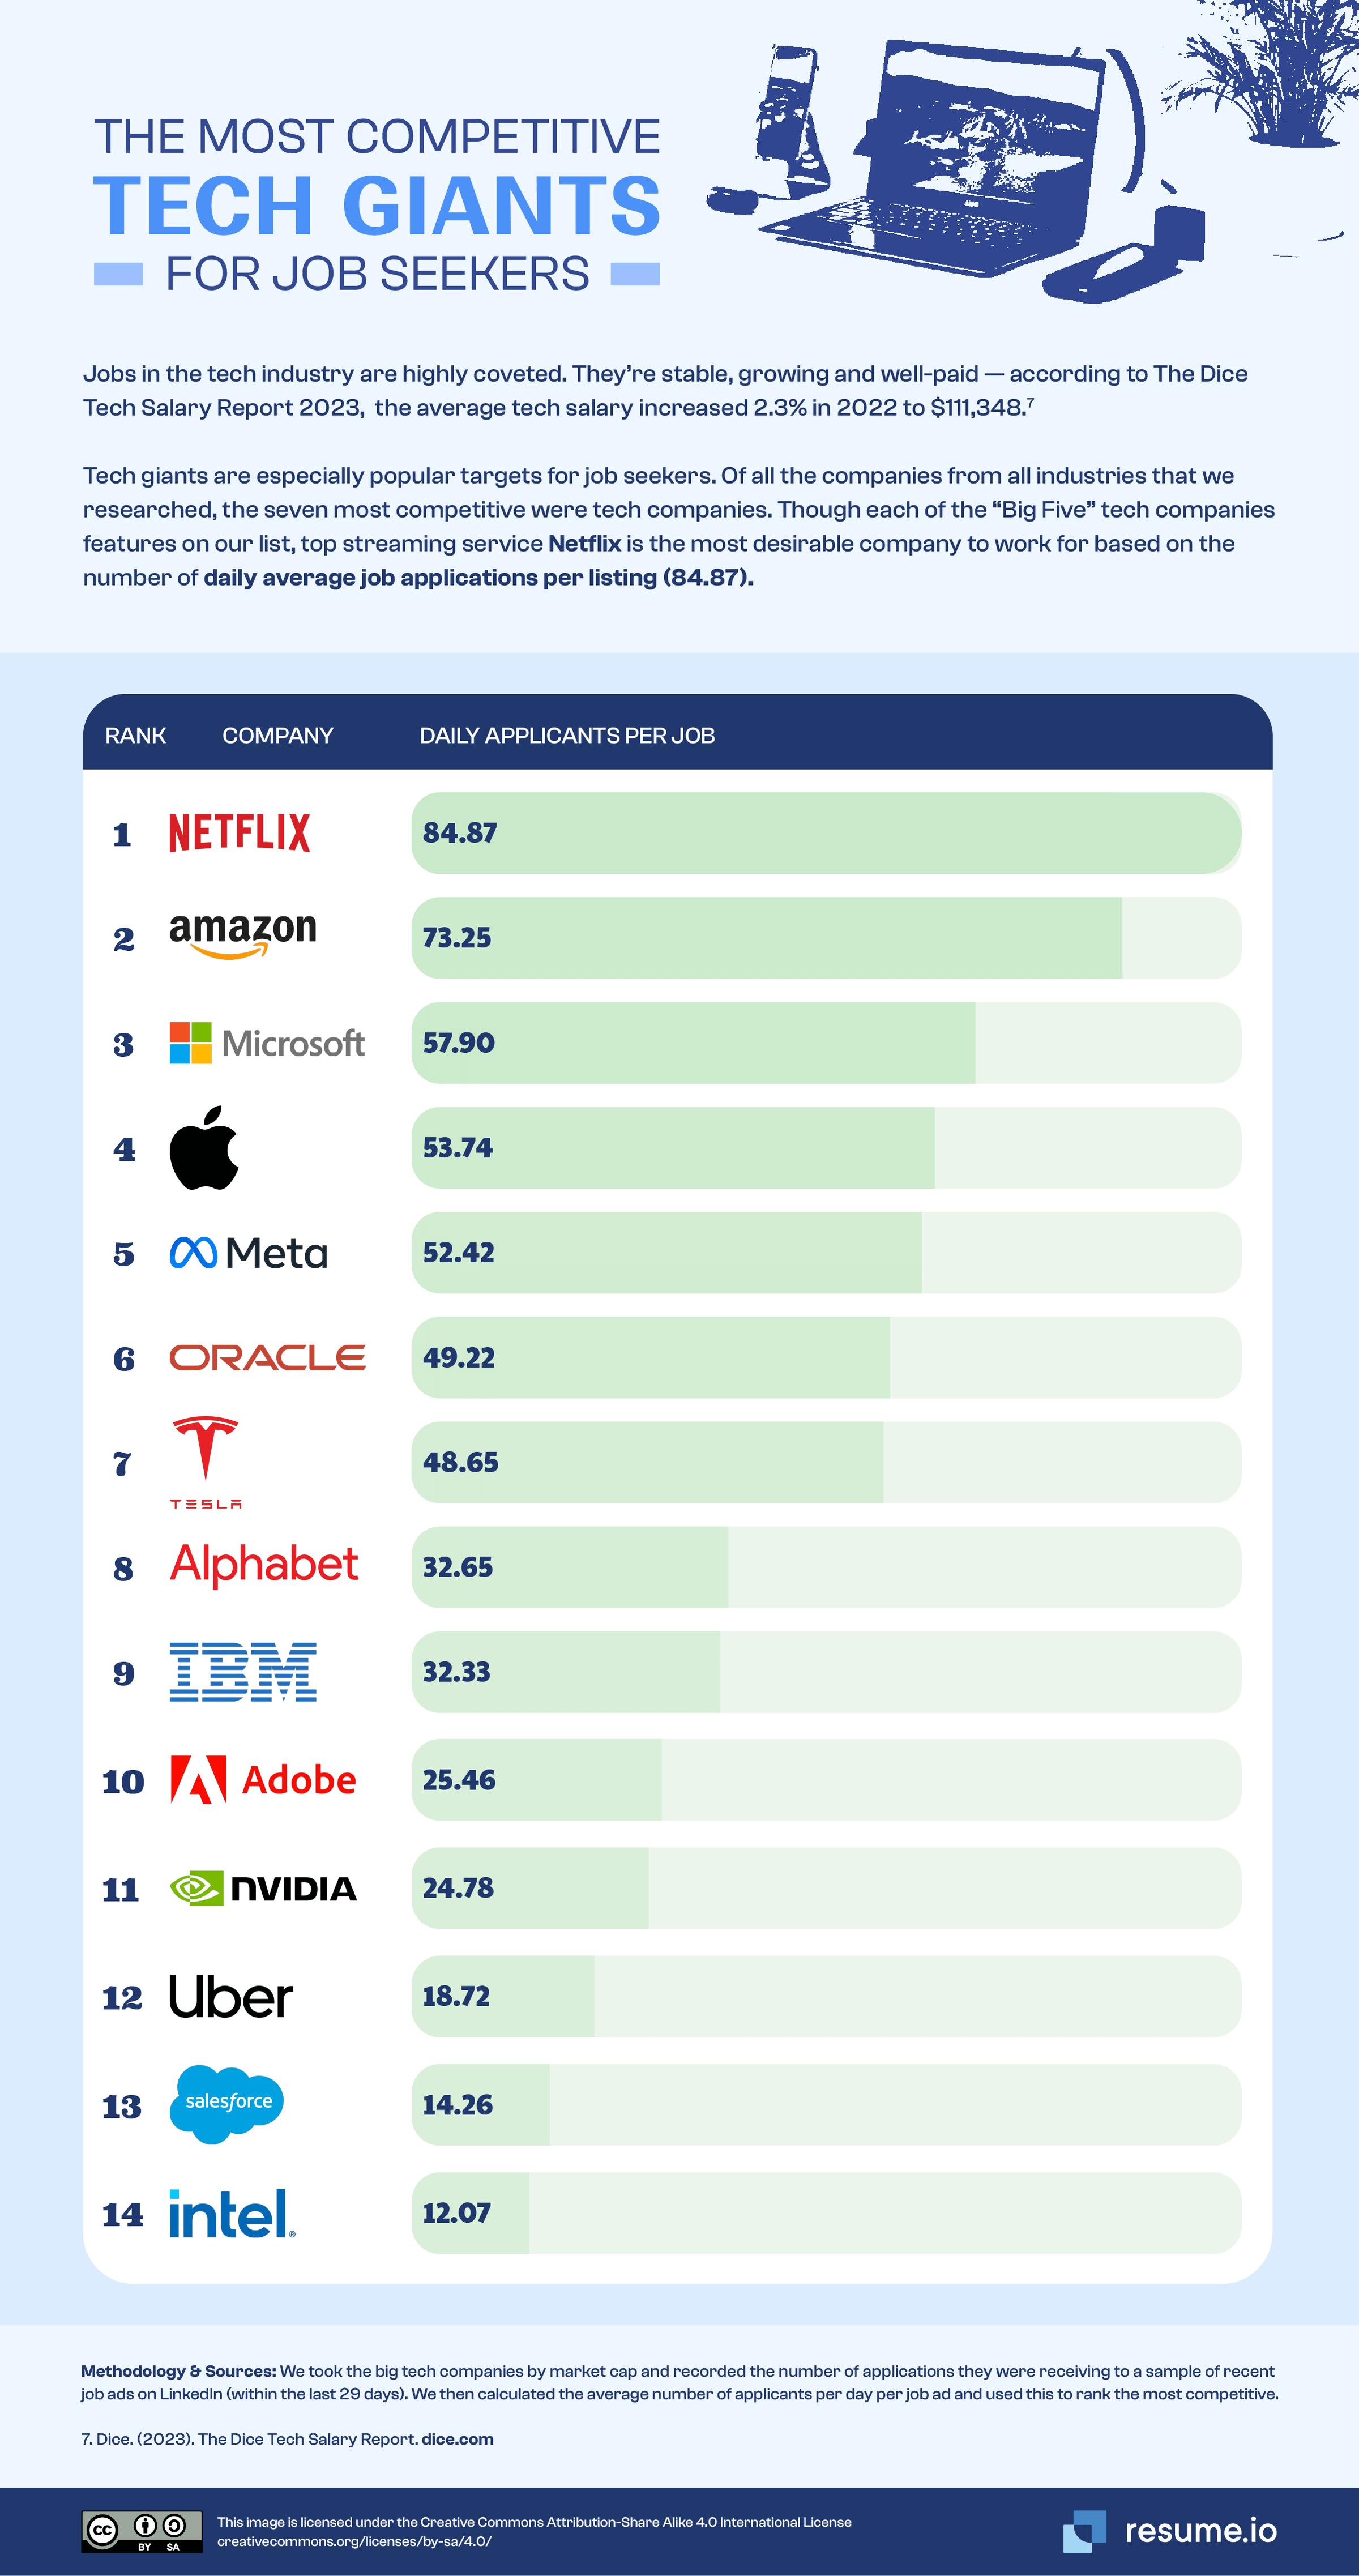 Most competitive tech giants for job seekers